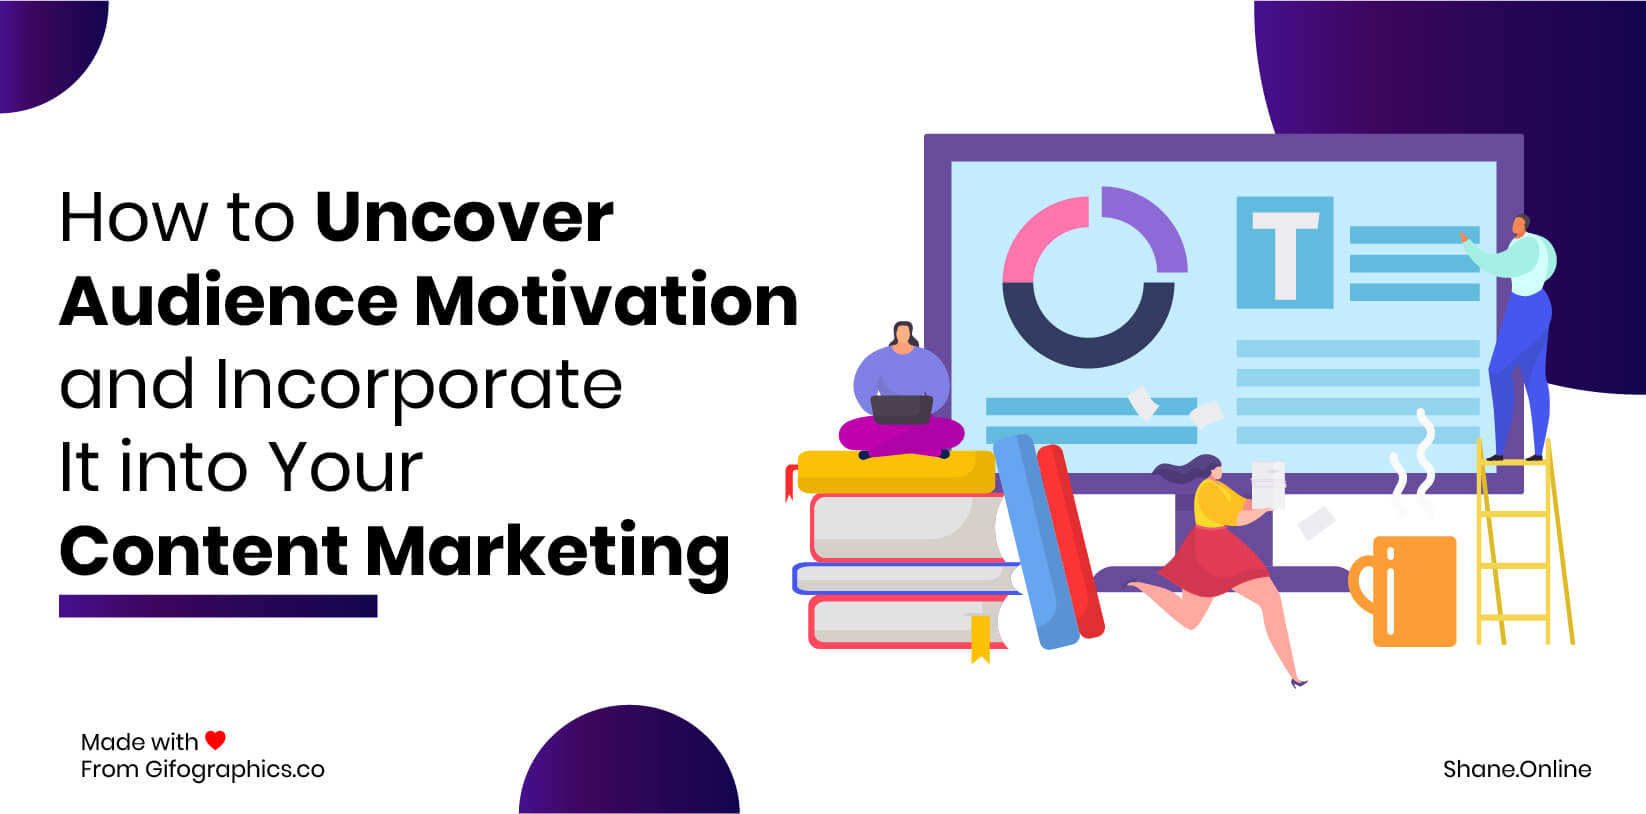 how to uncover audience motivation and incorporate it into your content marketing